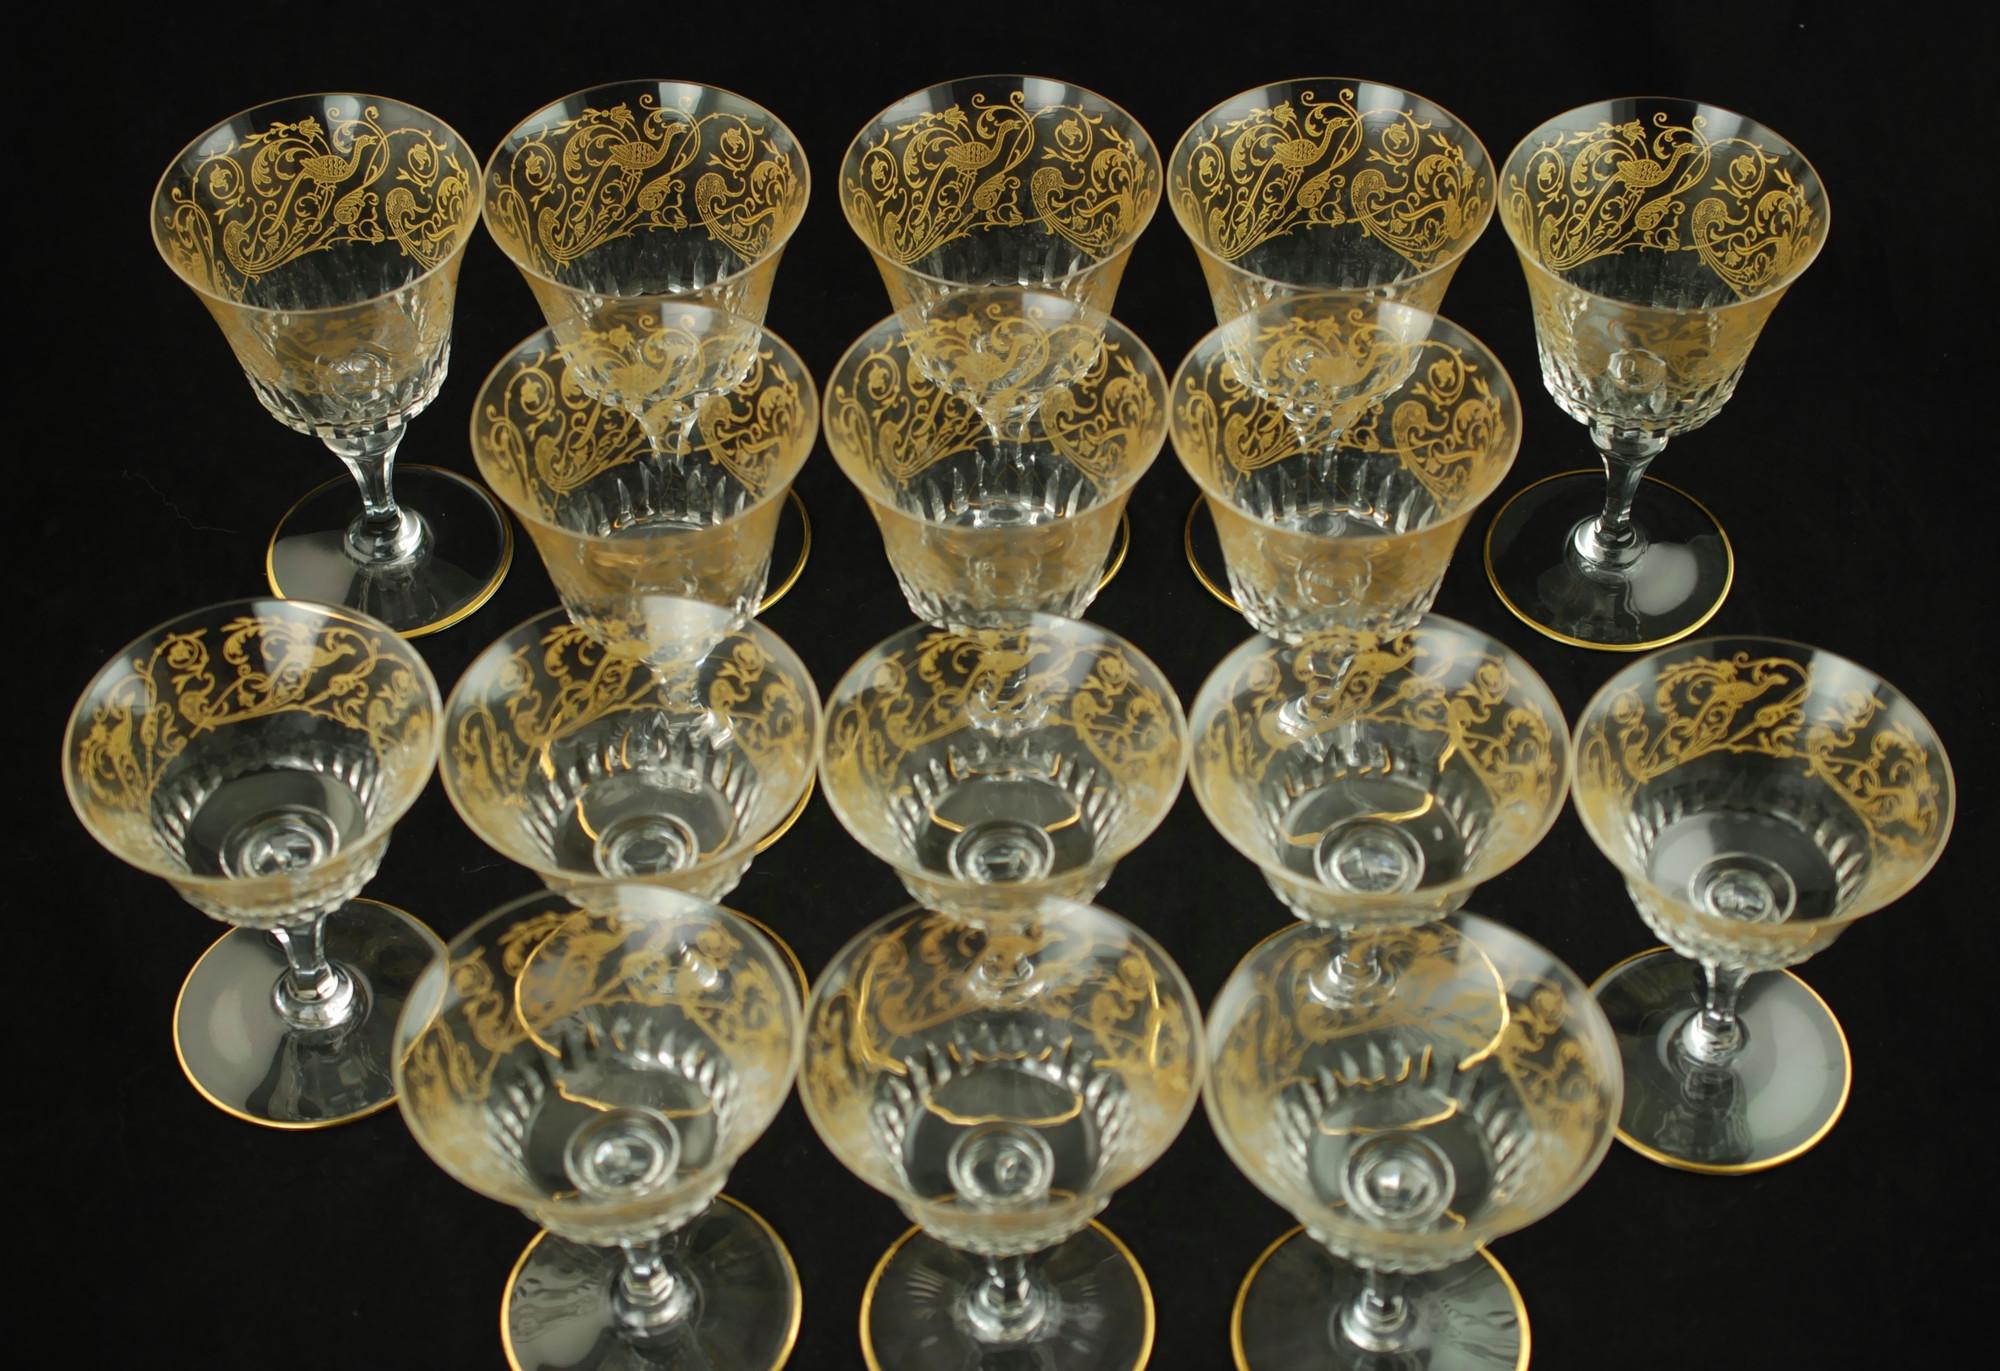 Baccarat Bergame Parme Gilt Etched Crystal Glasses with Paneled Stems Set of 16 For Sale 8